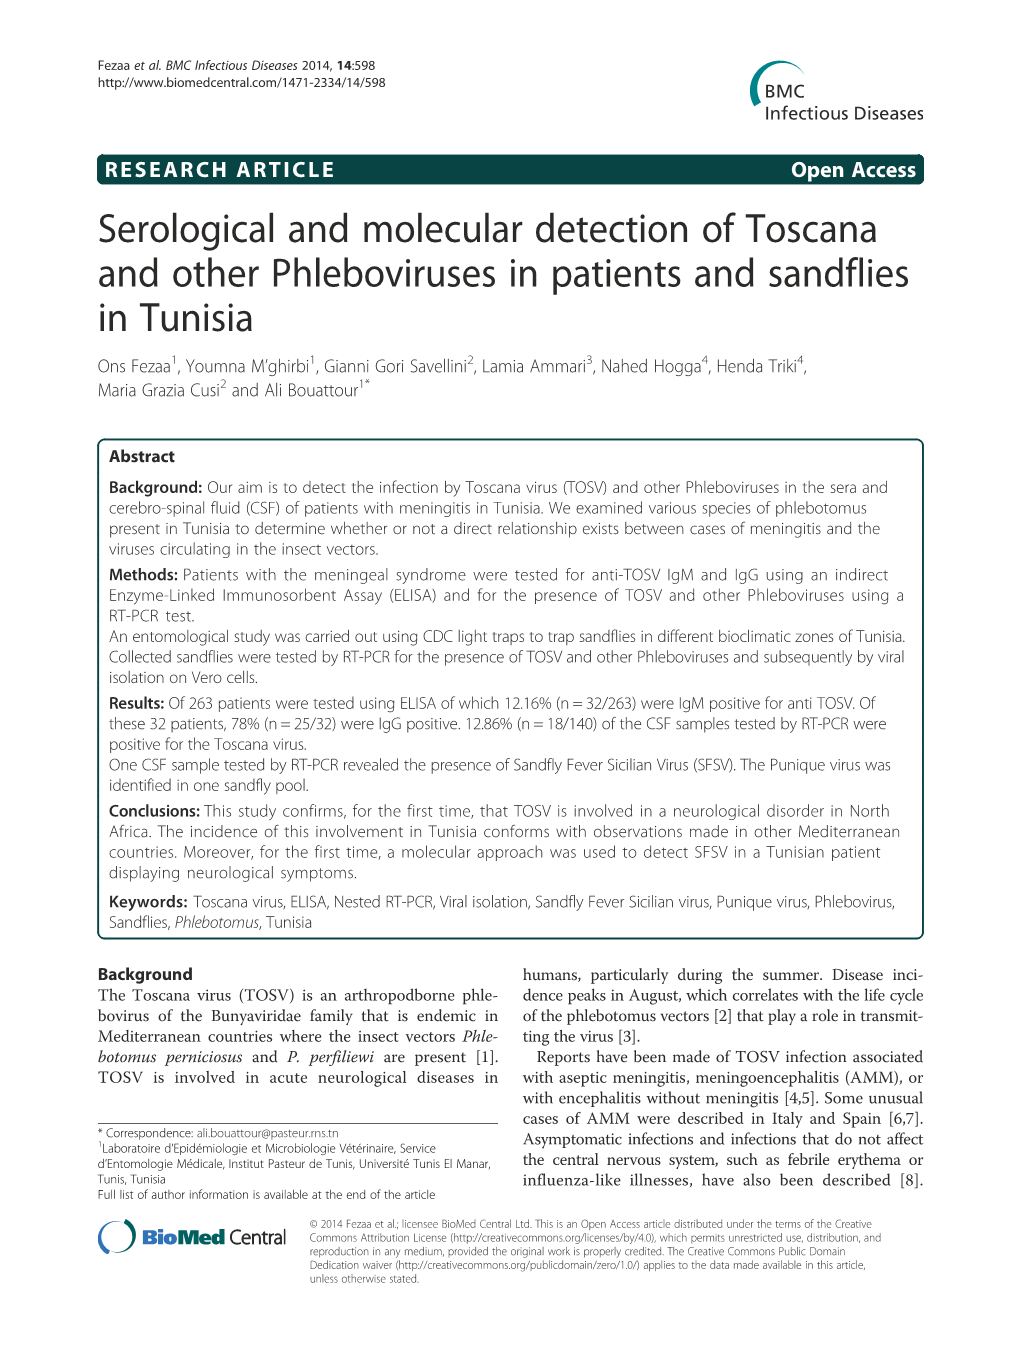 Serological and Molecular Detection of Toscana and Other Phleboviruses